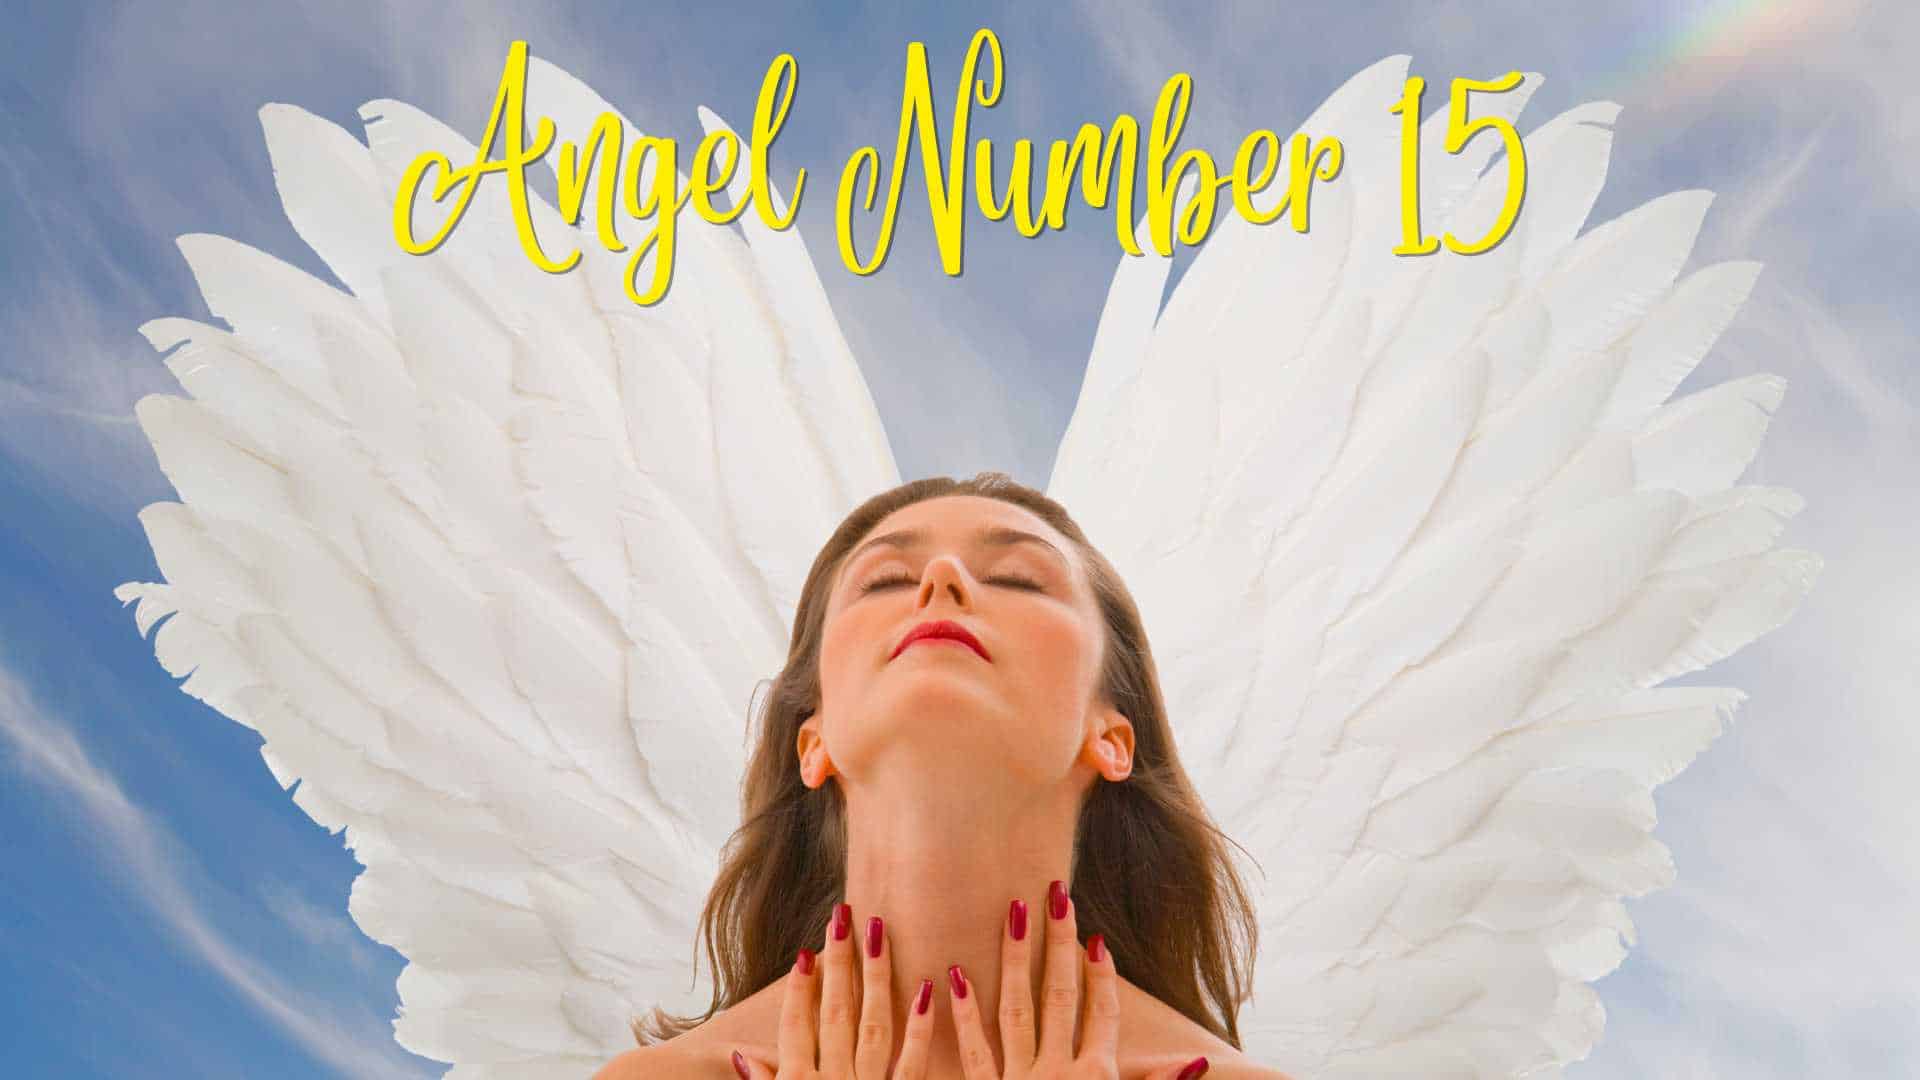 Angel Number 15 Meaning featured image